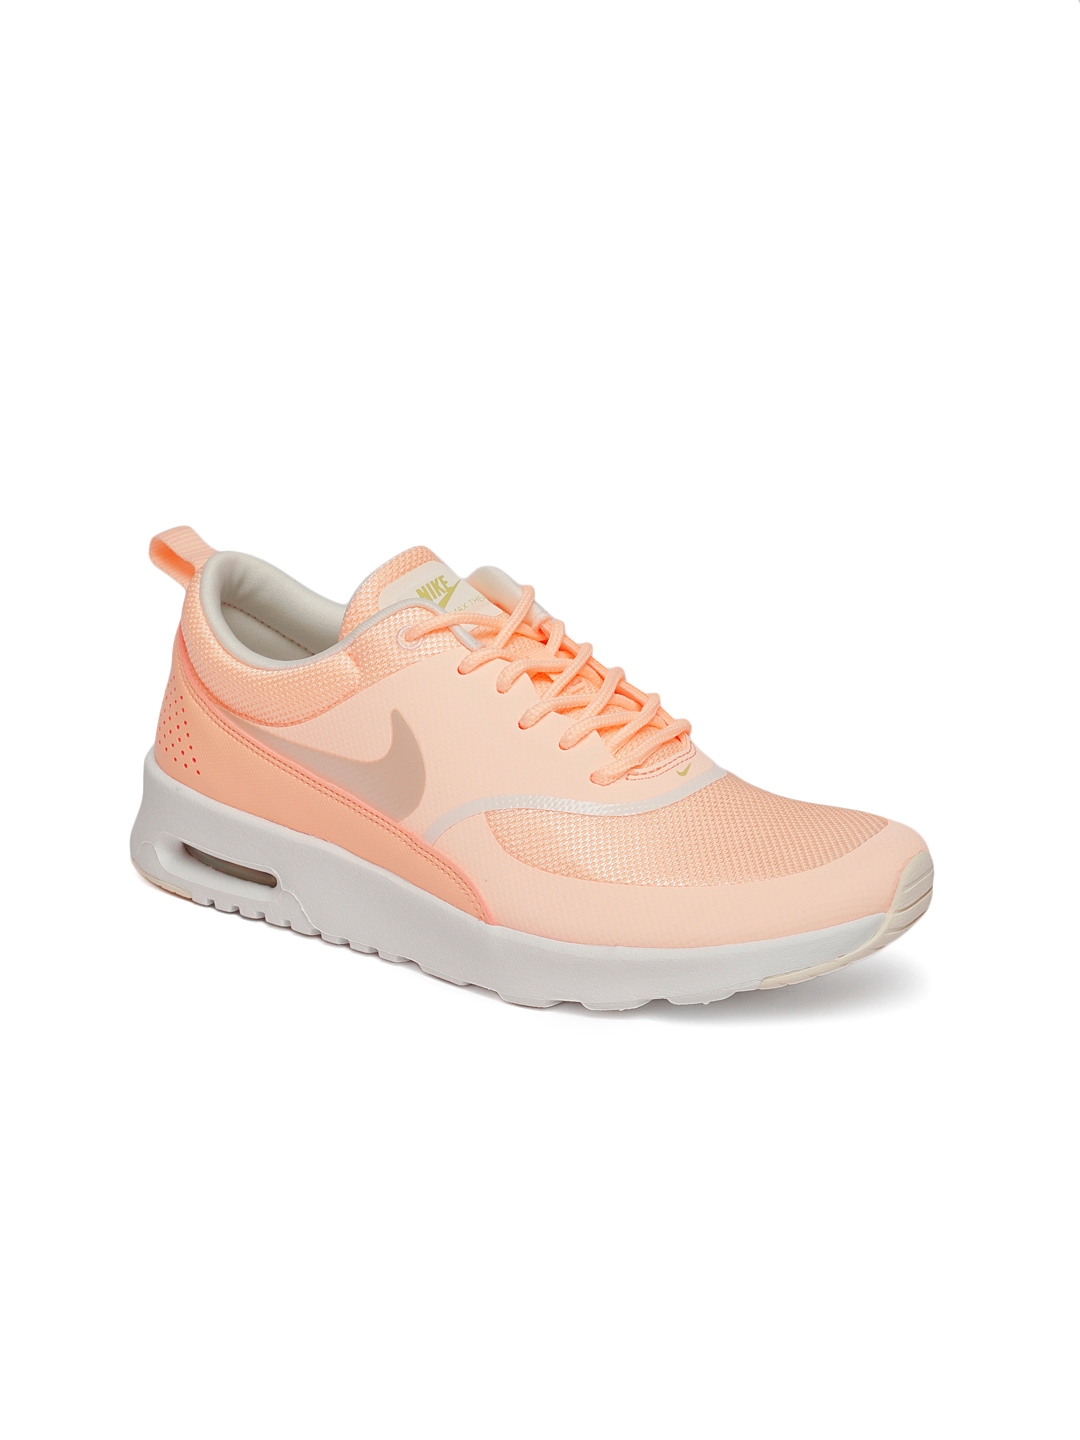 Despertar Hervir Larry Belmont Buy Nike Women Coral AIR MAX THEA Sneakers - Casual Shoes for Women 8194229  | Myntra